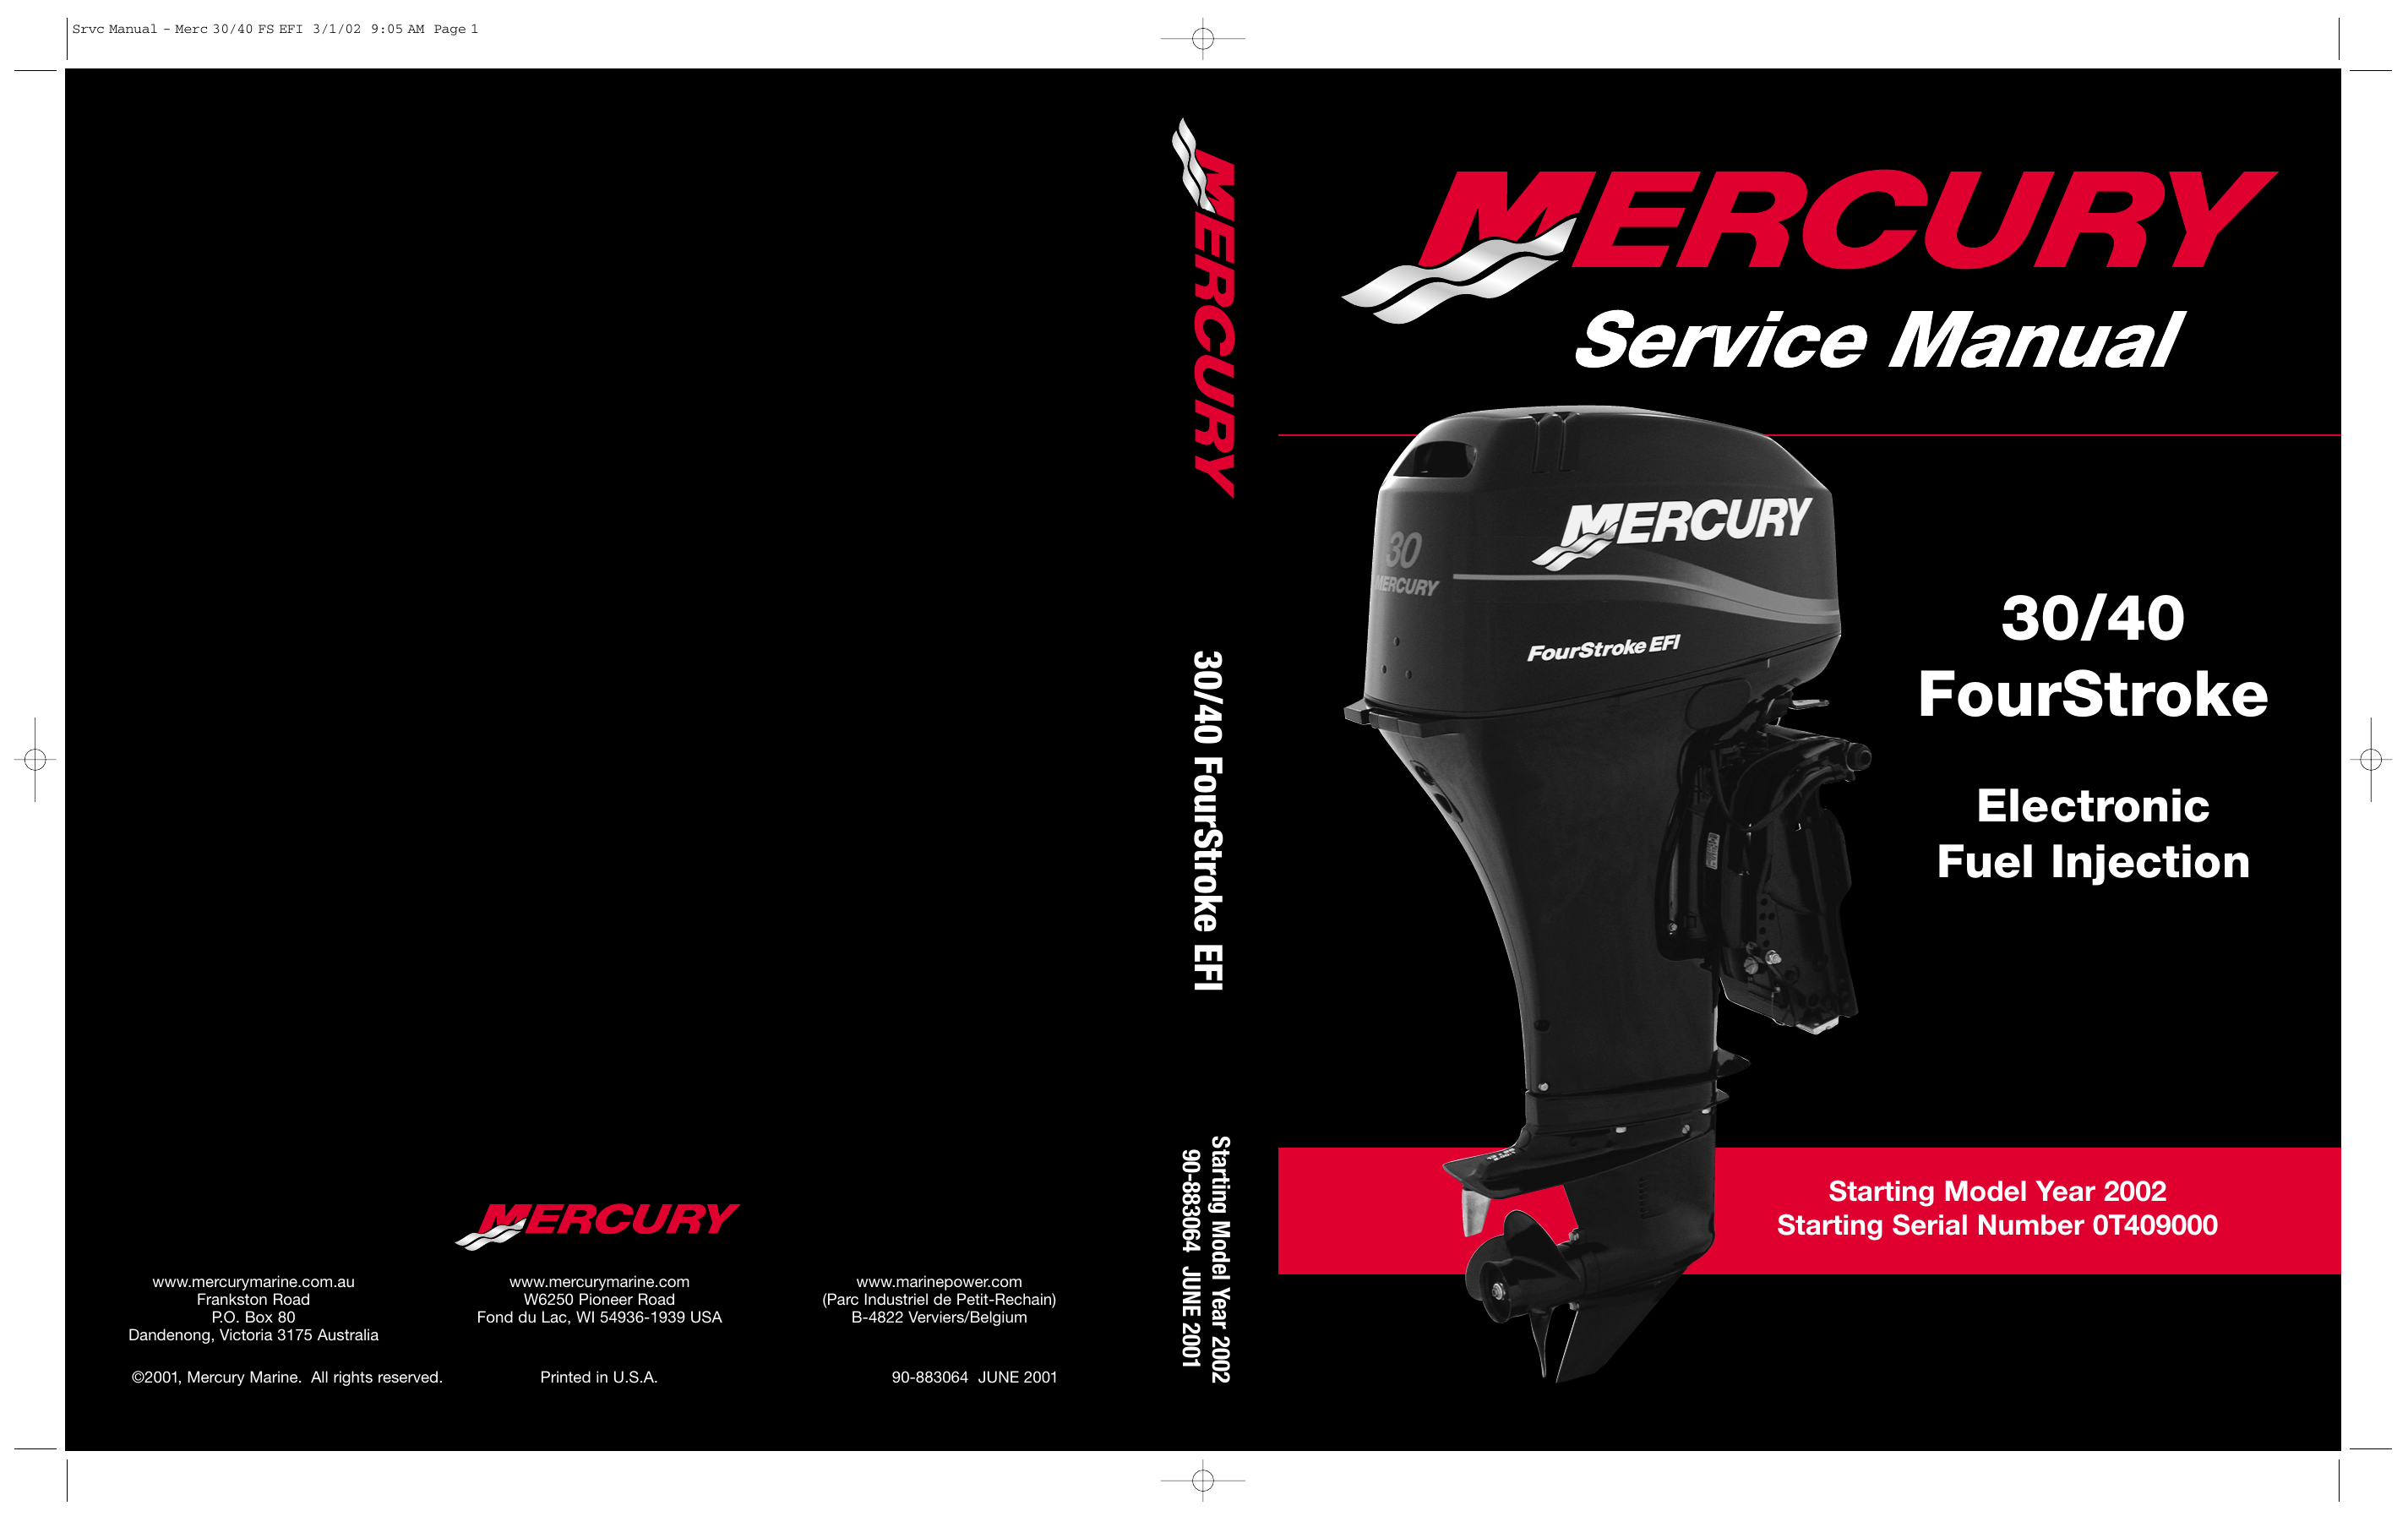 2002 Mercury Mariner 30/40 FourStroke EFI outboard motor service manual Preview image 6